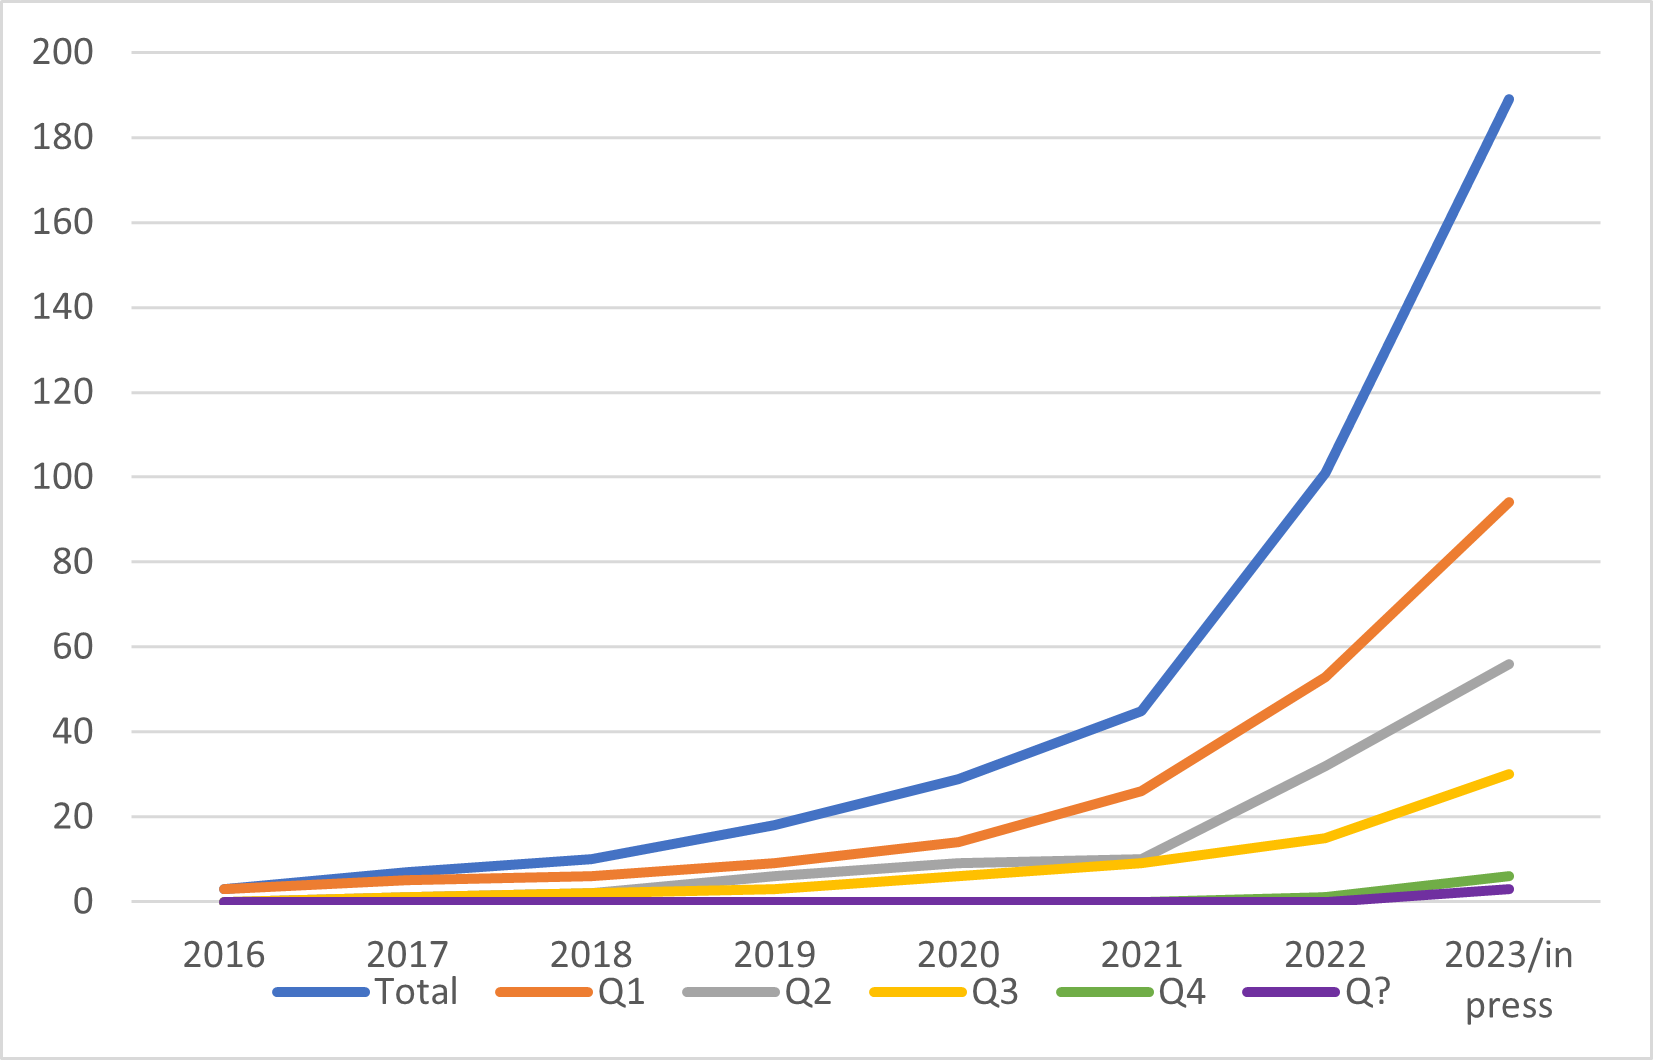 Cumulative number of publications in Web of Science (Clarivate) ranked journals that apply NCA. (Situation of 31 December 2023).